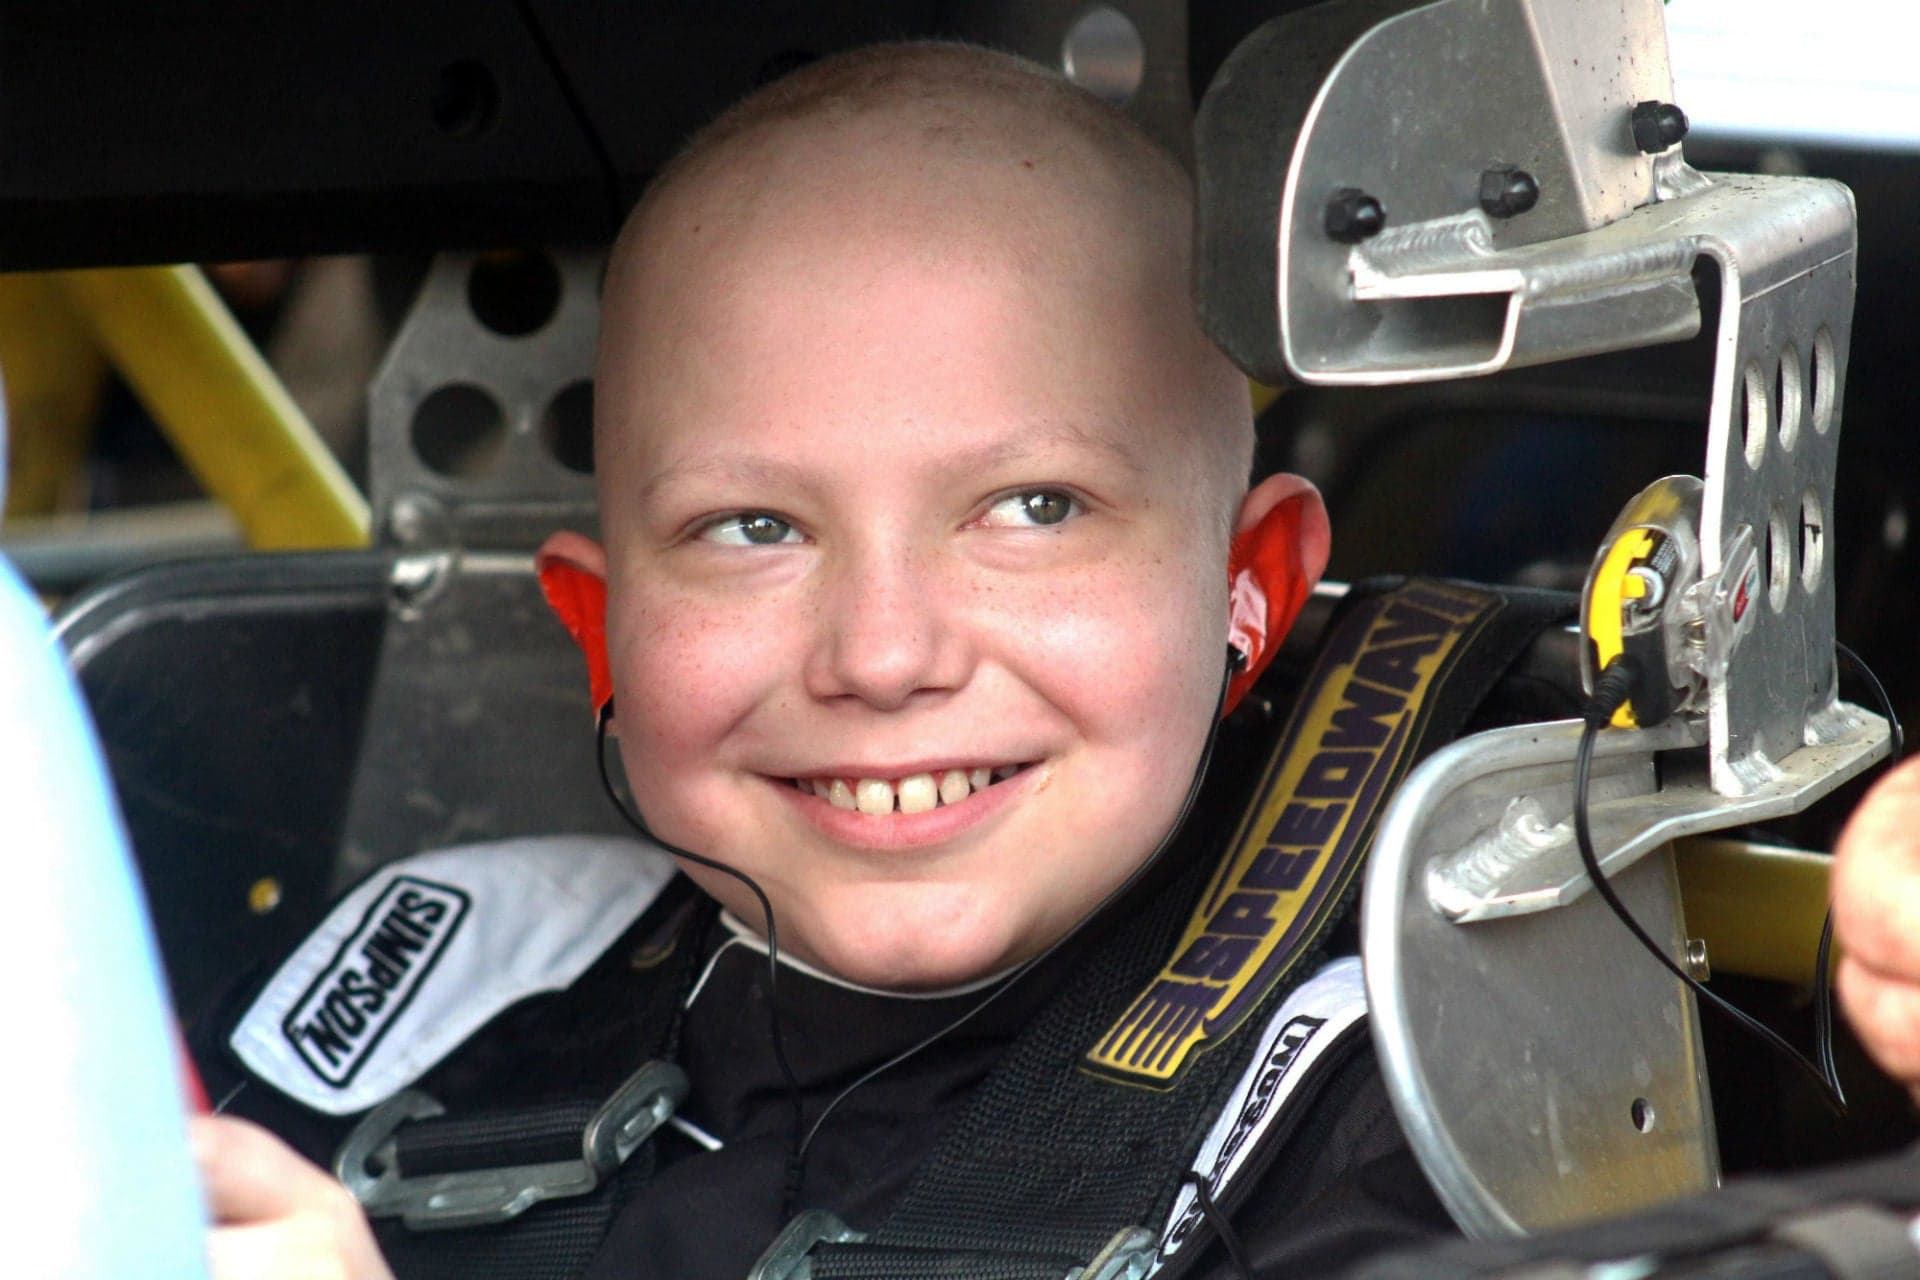 NASCAR Teams Honor Young Race Fan With Leukemia Who Passed Away at Age 11